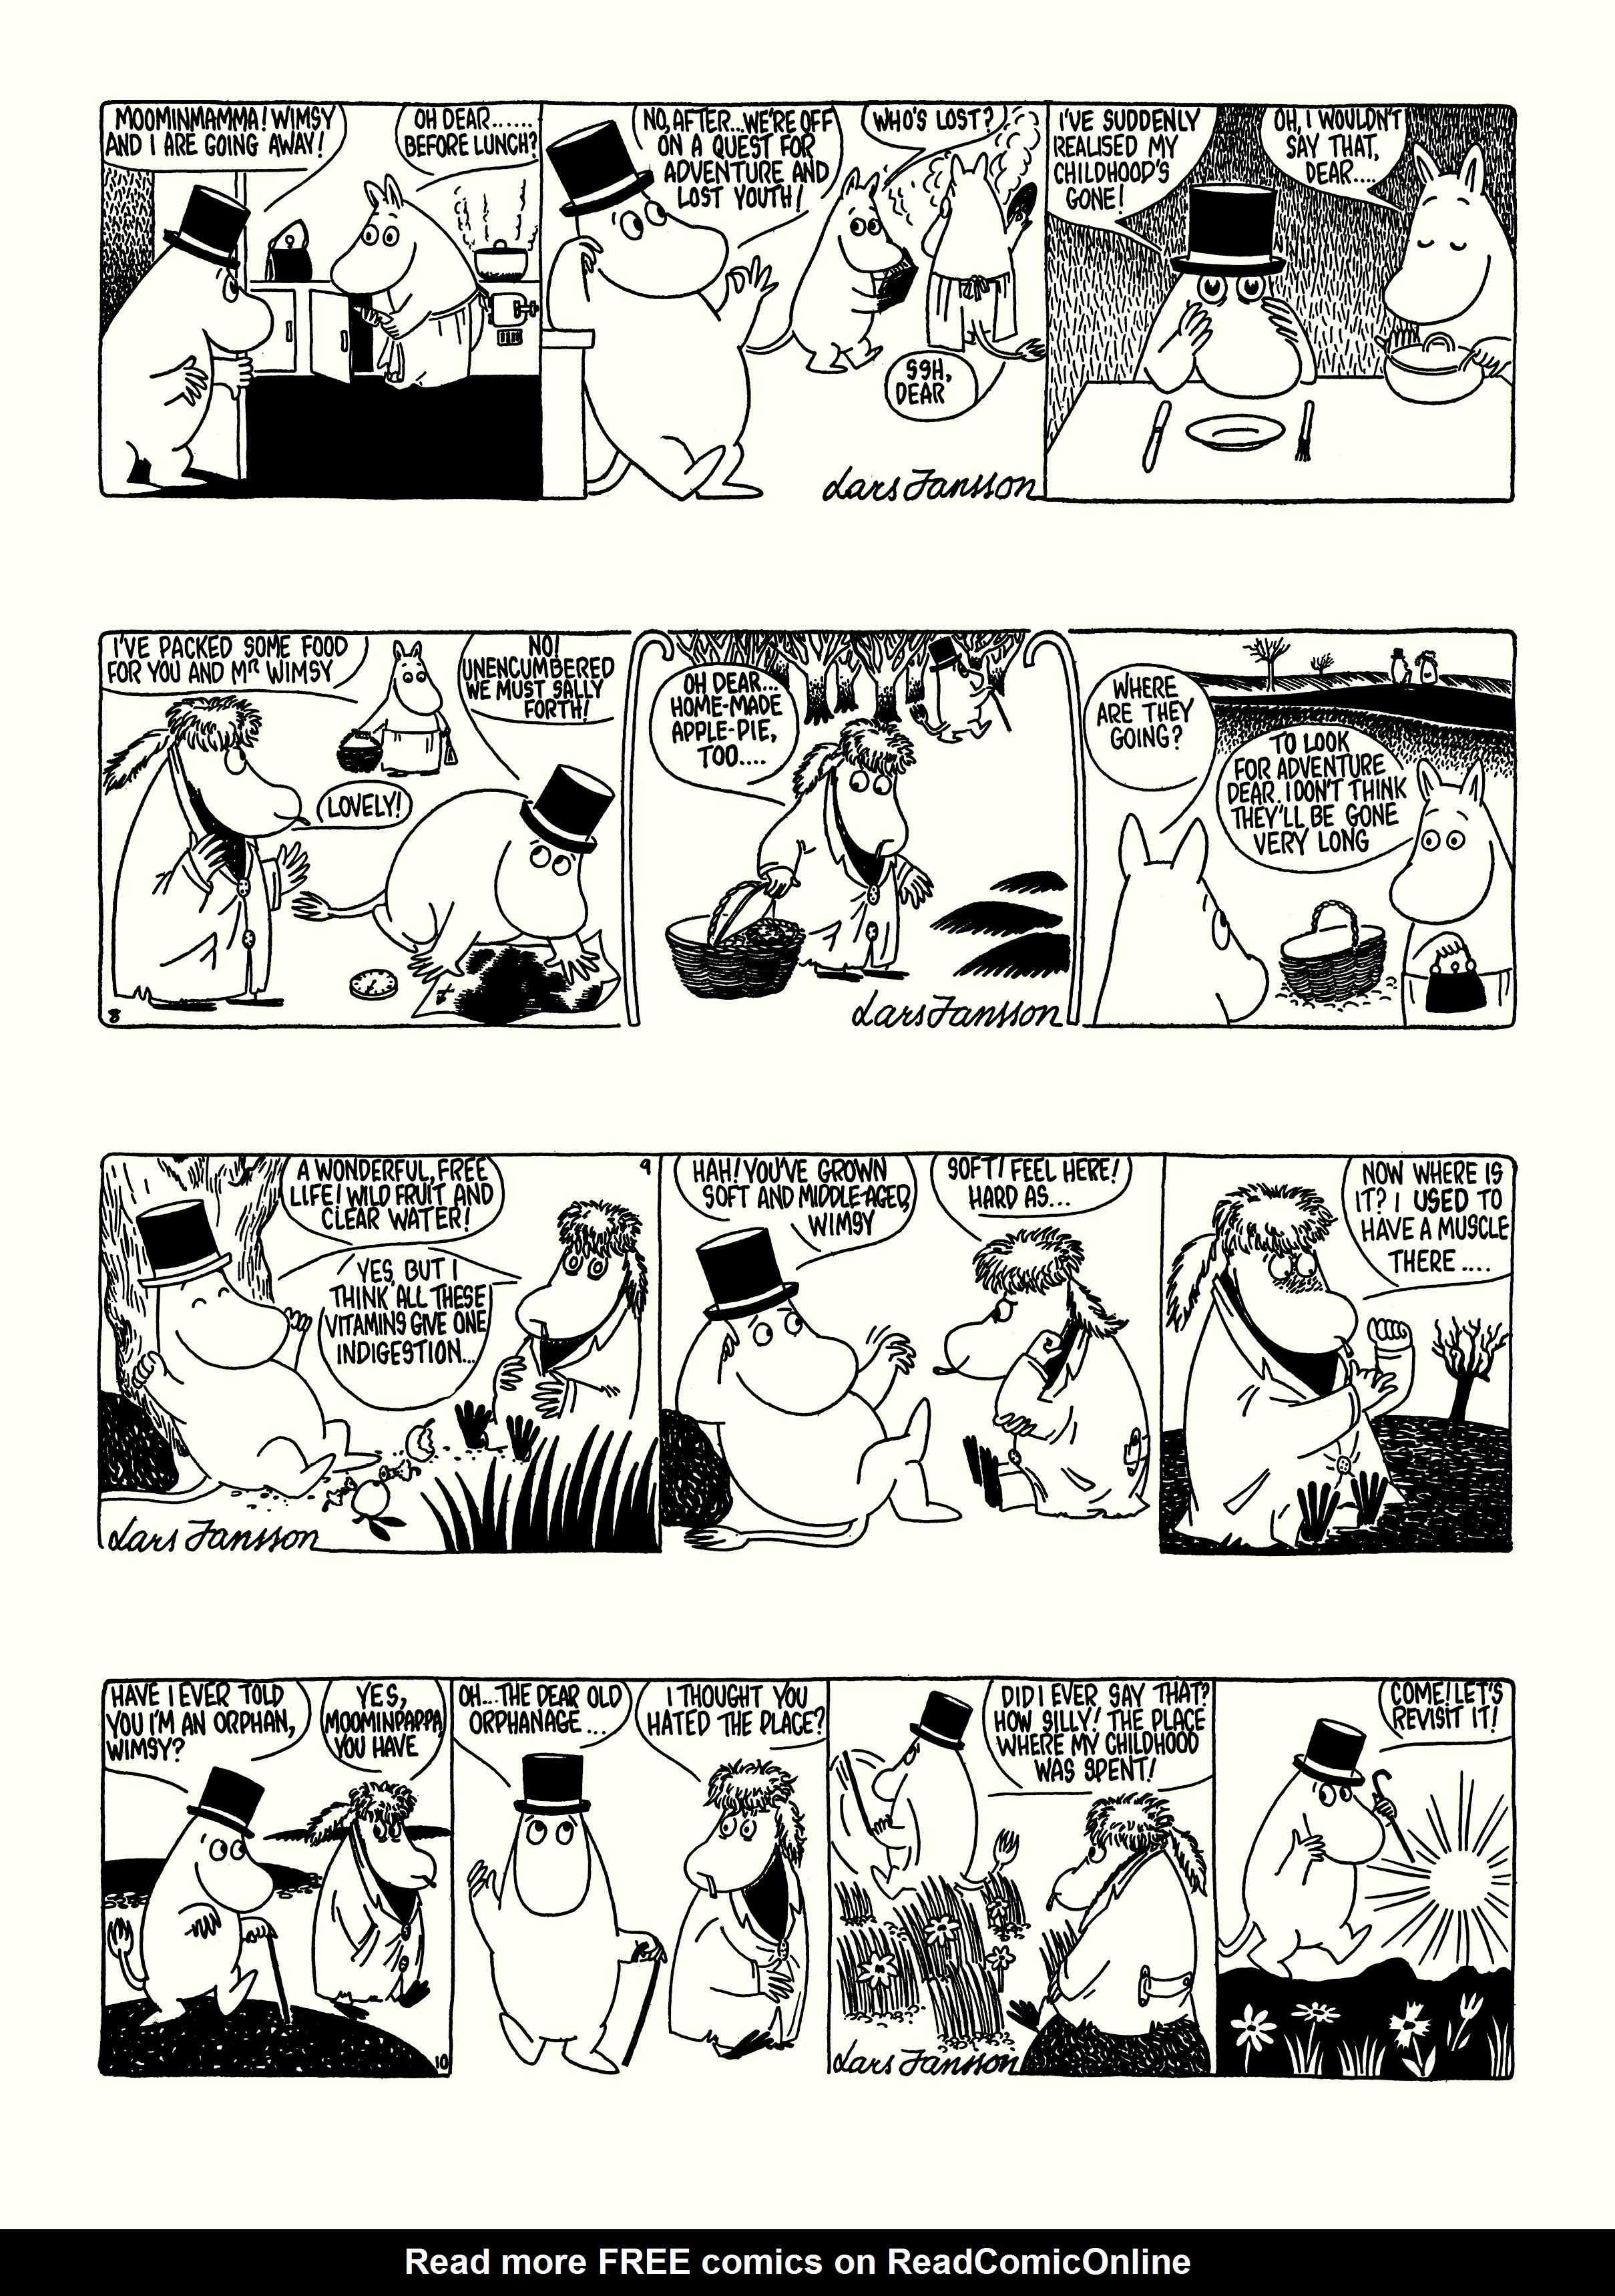 Read online Moomin: The Complete Lars Jansson Comic Strip comic -  Issue # TPB 6 - 49